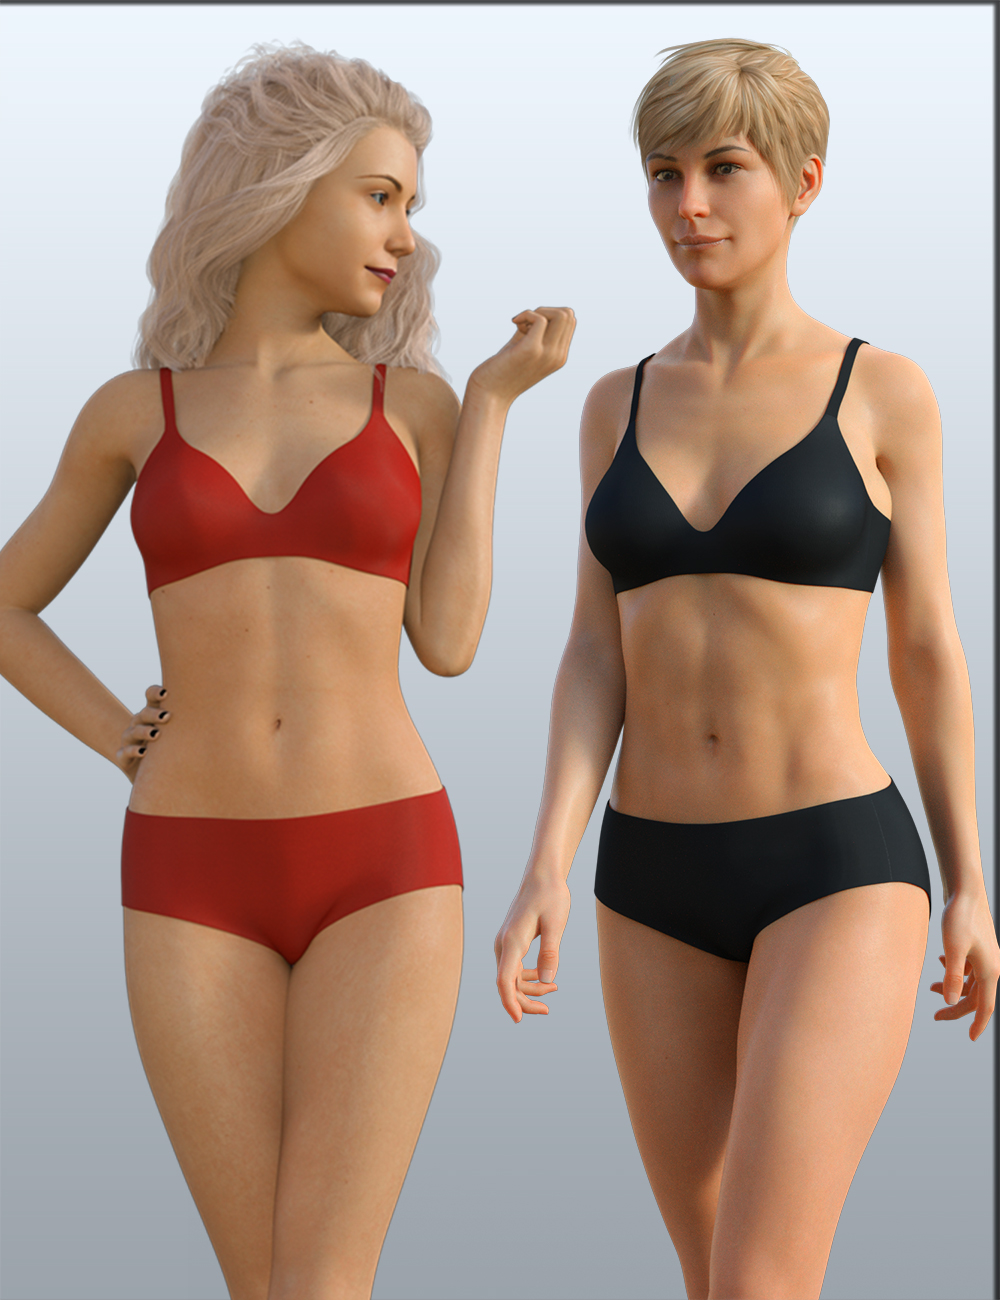 H&C Basic Underwear for Genesis 8 Female(s) by: IH Kang, 3D Models by Daz 3D